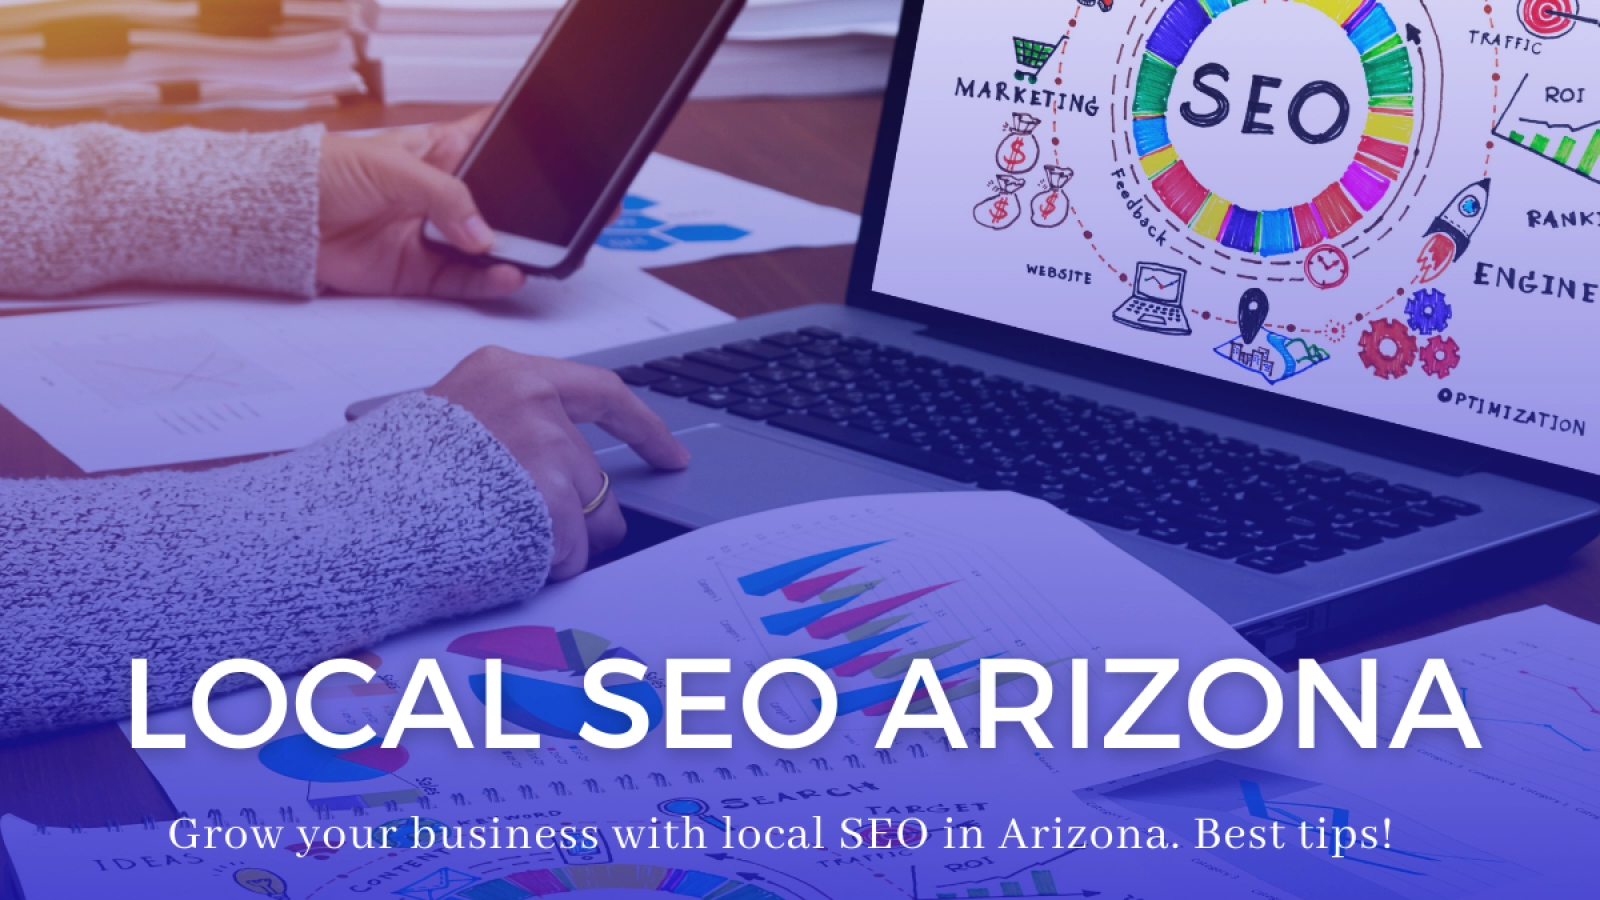 Importance of Local SEO for Arizona Businesses